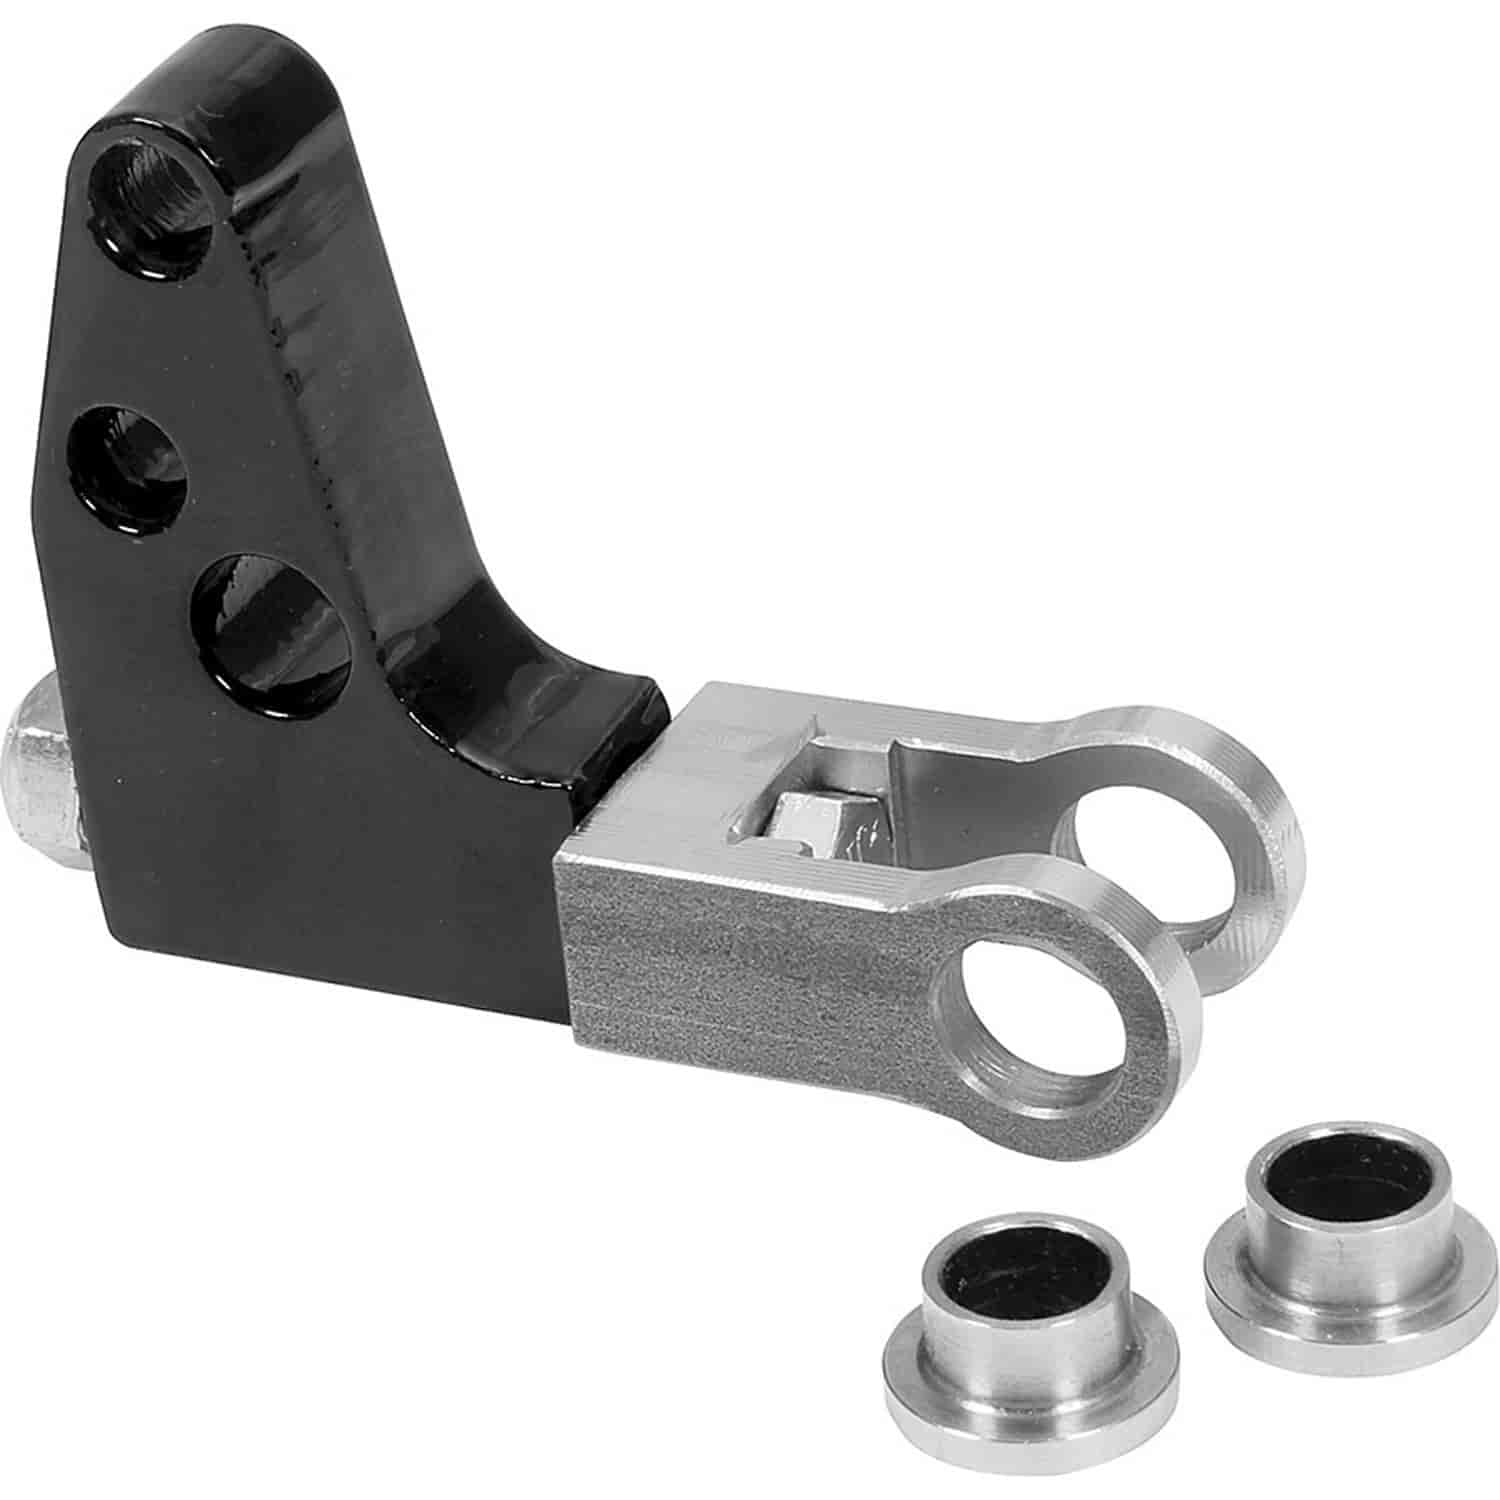 Replacement Shock Bracket With Swivel Clevis Mount & Spacers